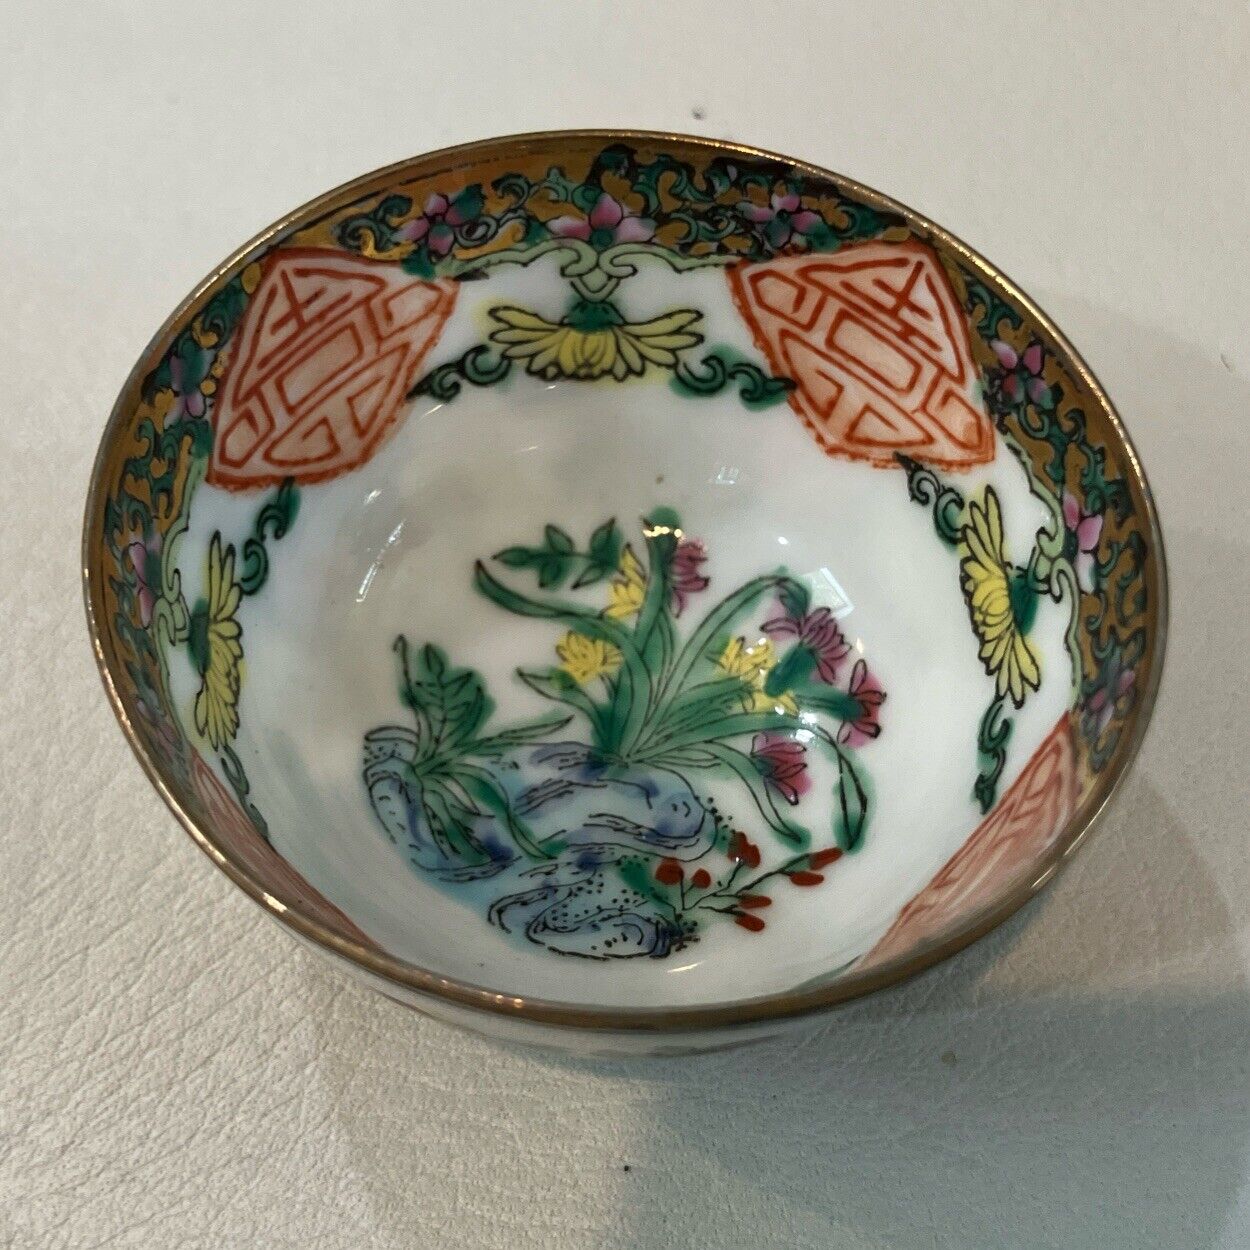 ANTIQUE CHINOISERIE CHINESE FAMILLE ROSE? MEDALLION Tiny Porcelain Bowl 2”